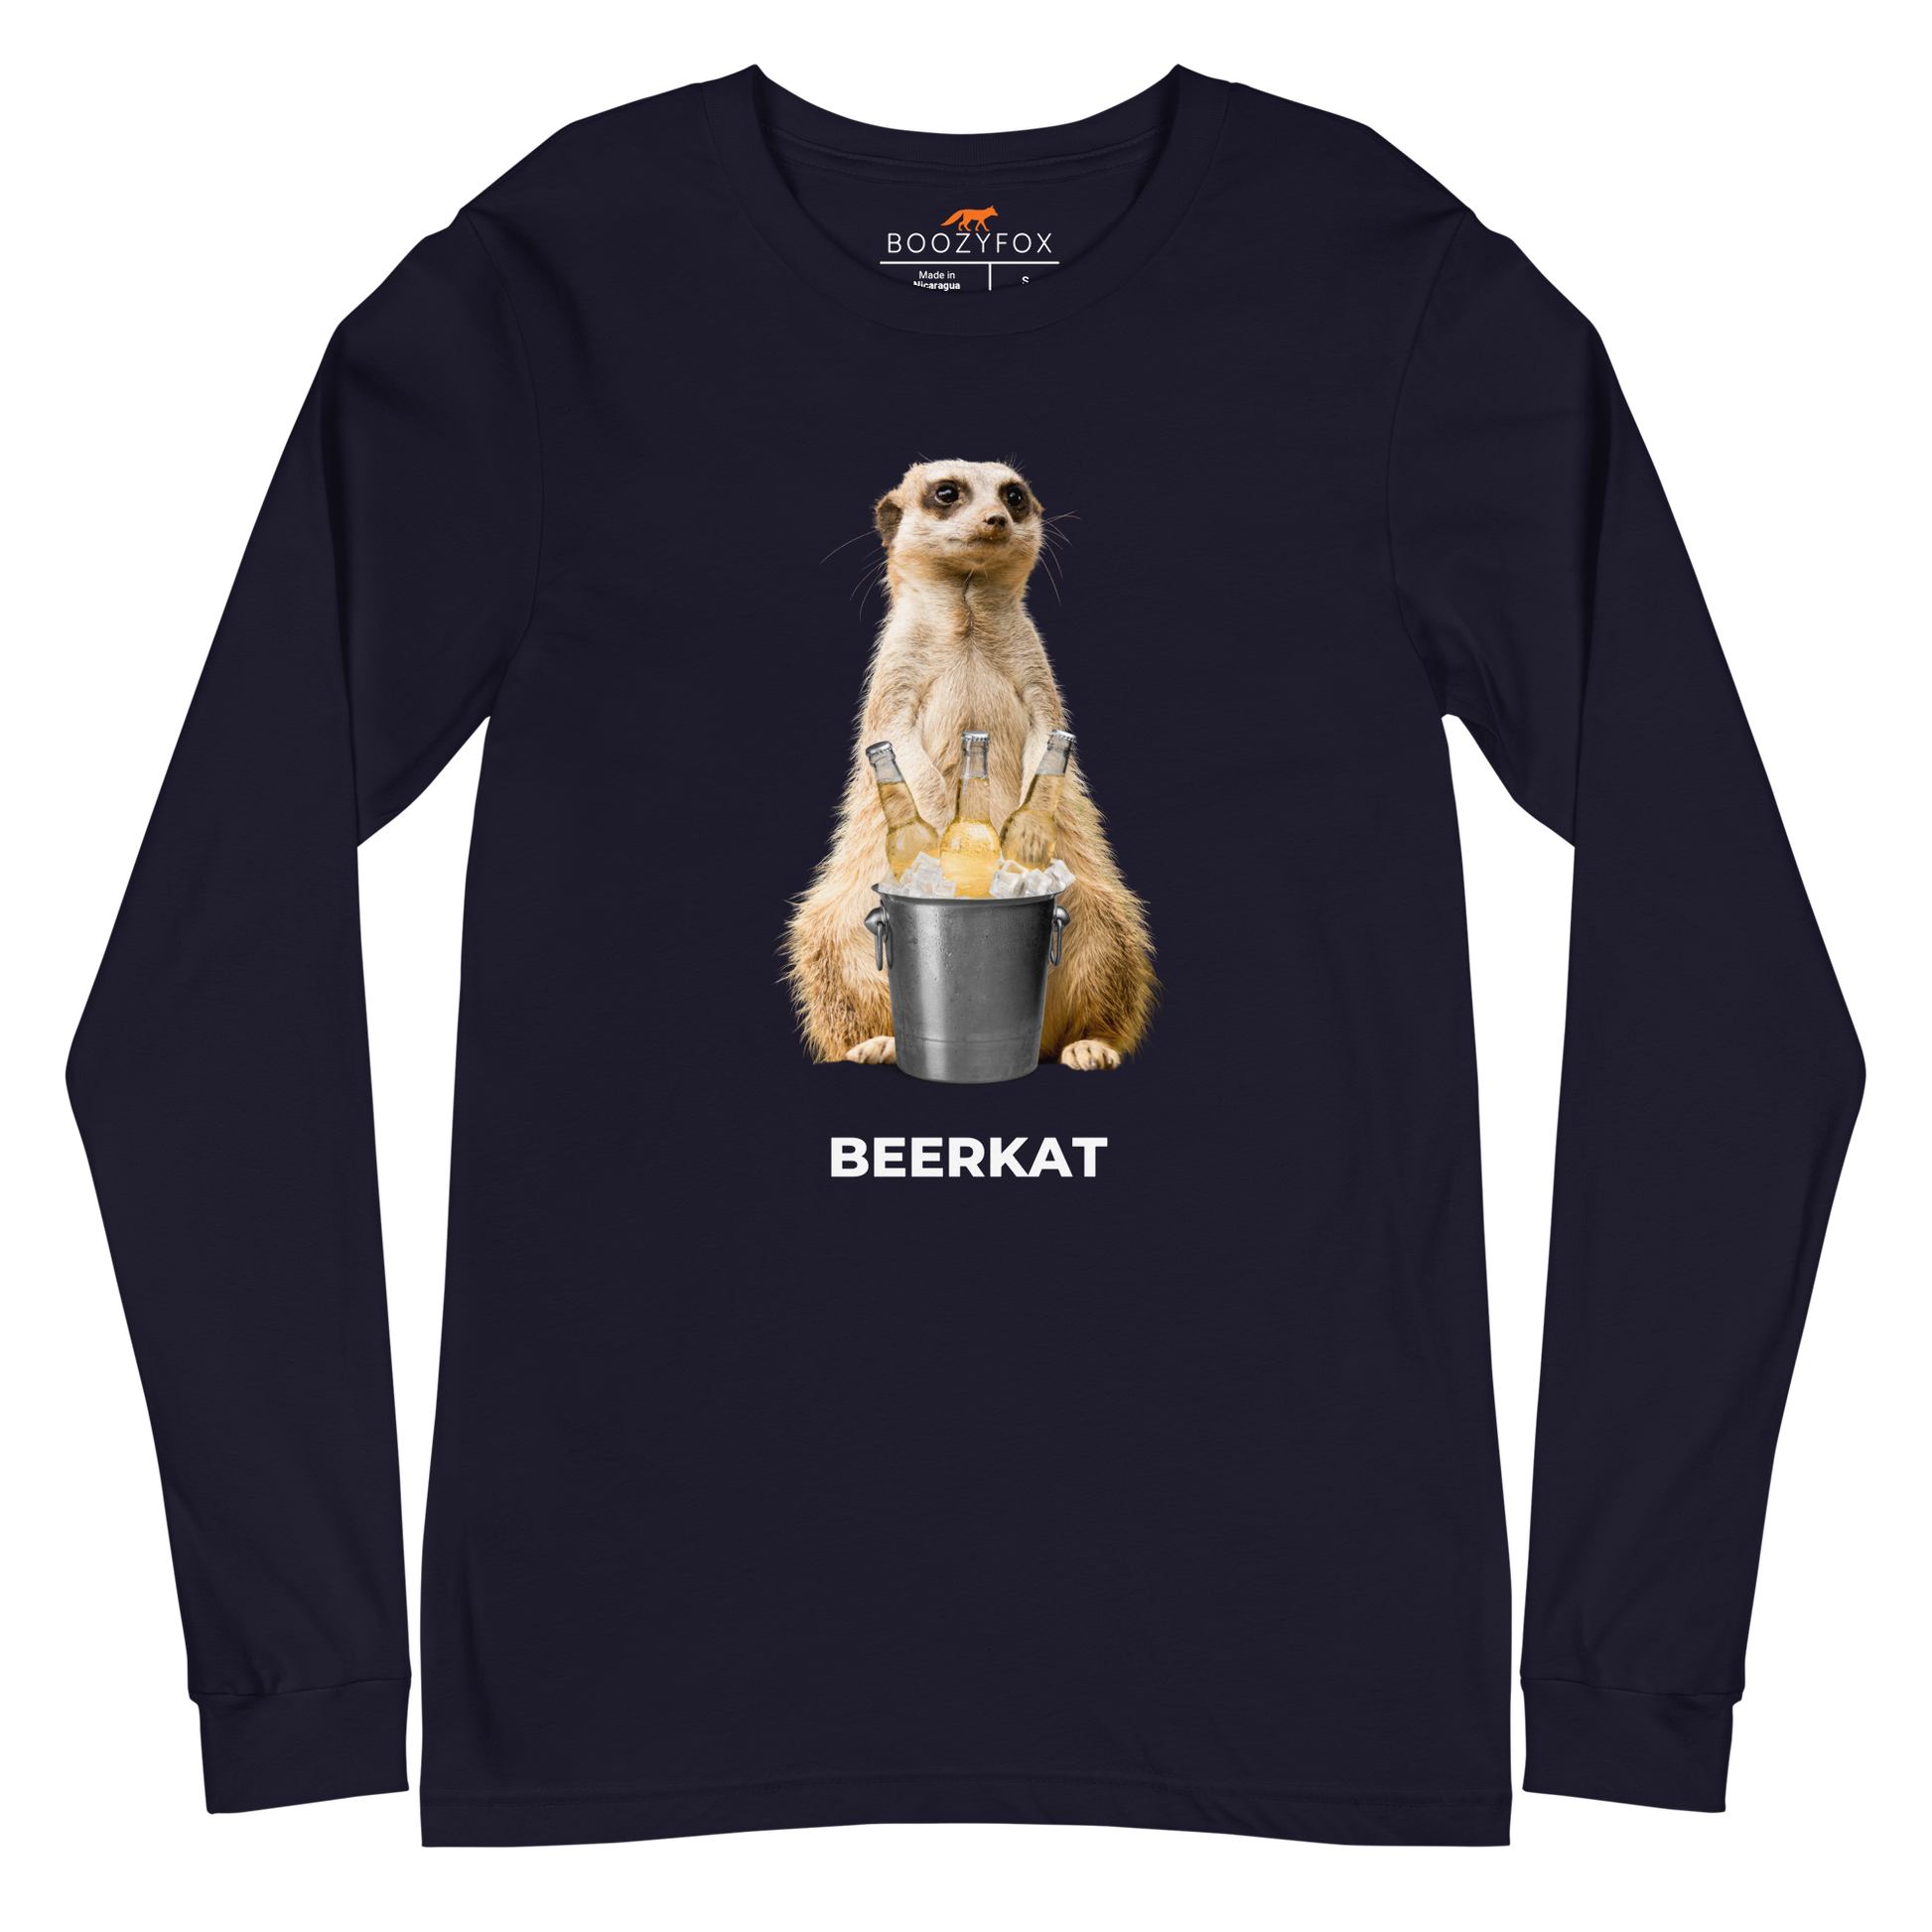 Navy Meerkat Long Sleeve Tee featuring a hilarious Beerkat graphic on the chest - Funny Meerkat Long Sleeve Graphic Tees - Boozy Fox